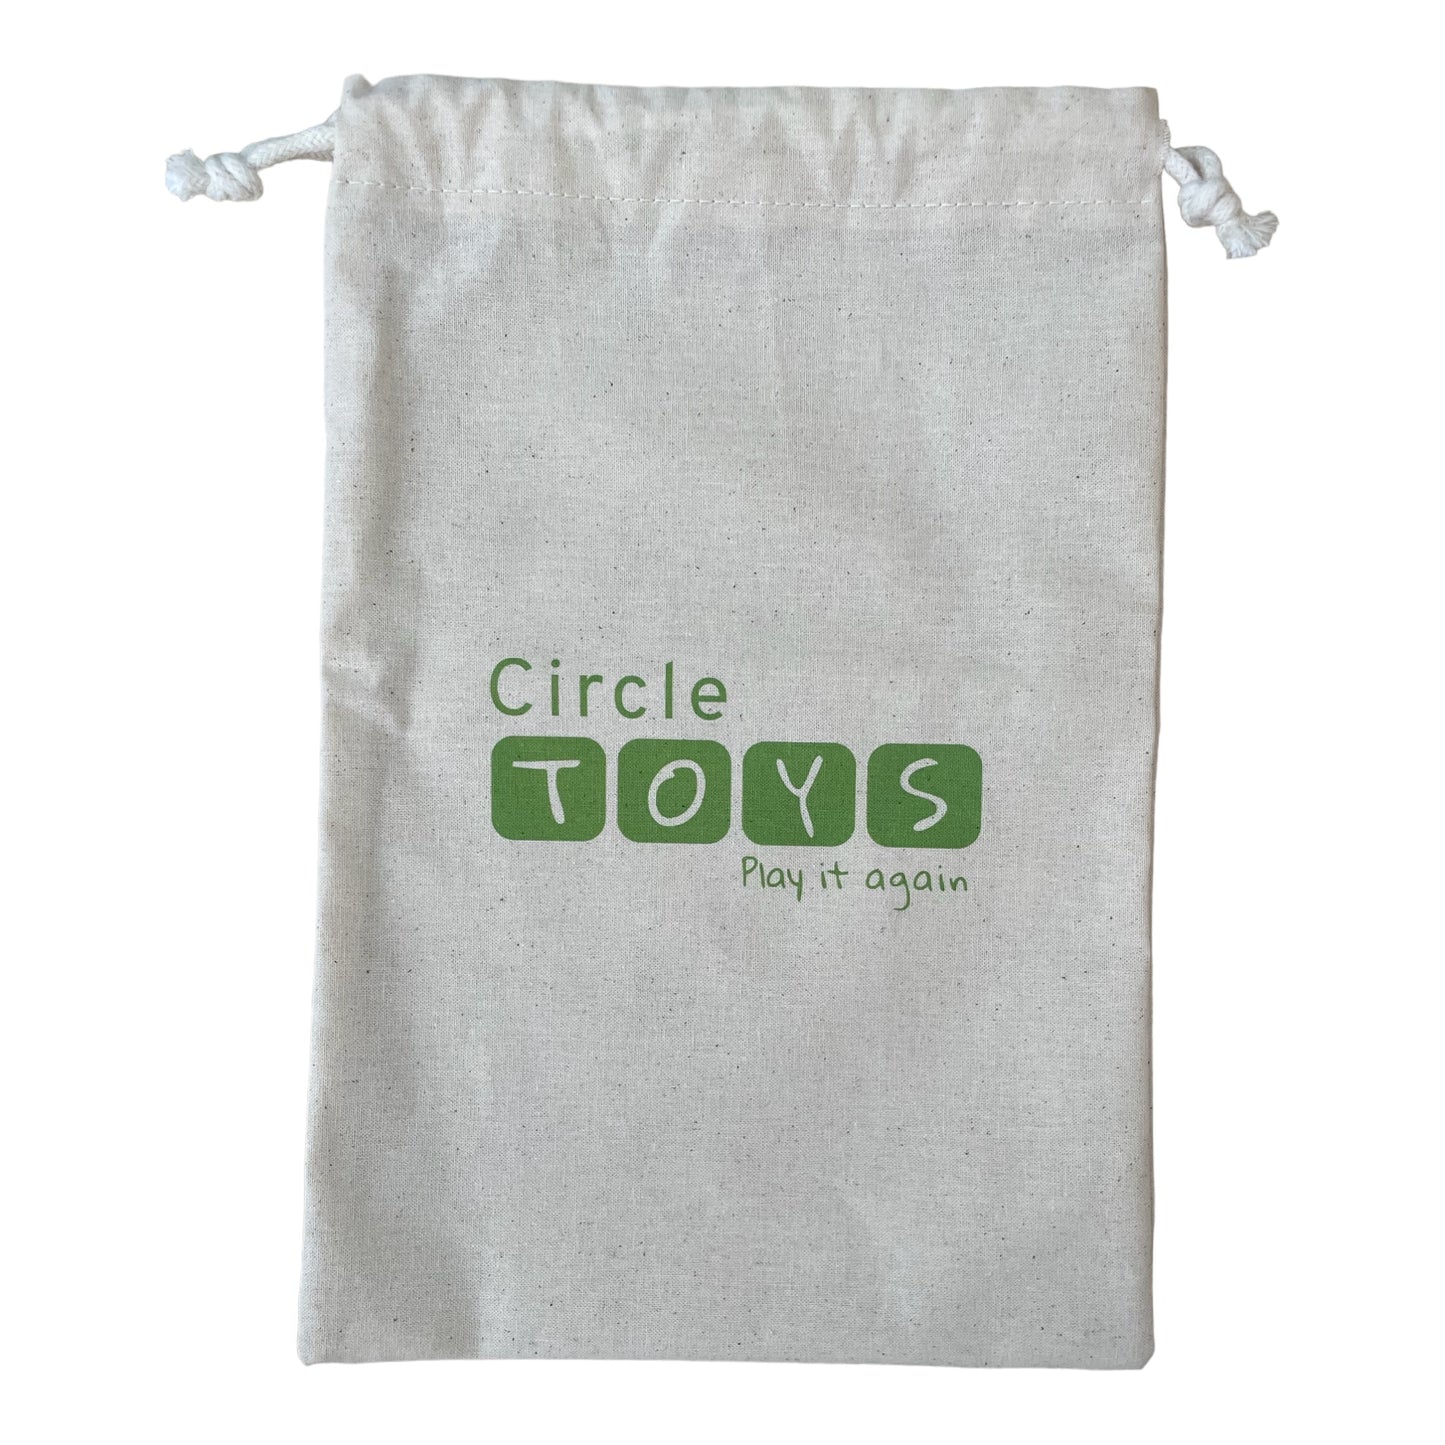 The Circle Toys Bag - Small size